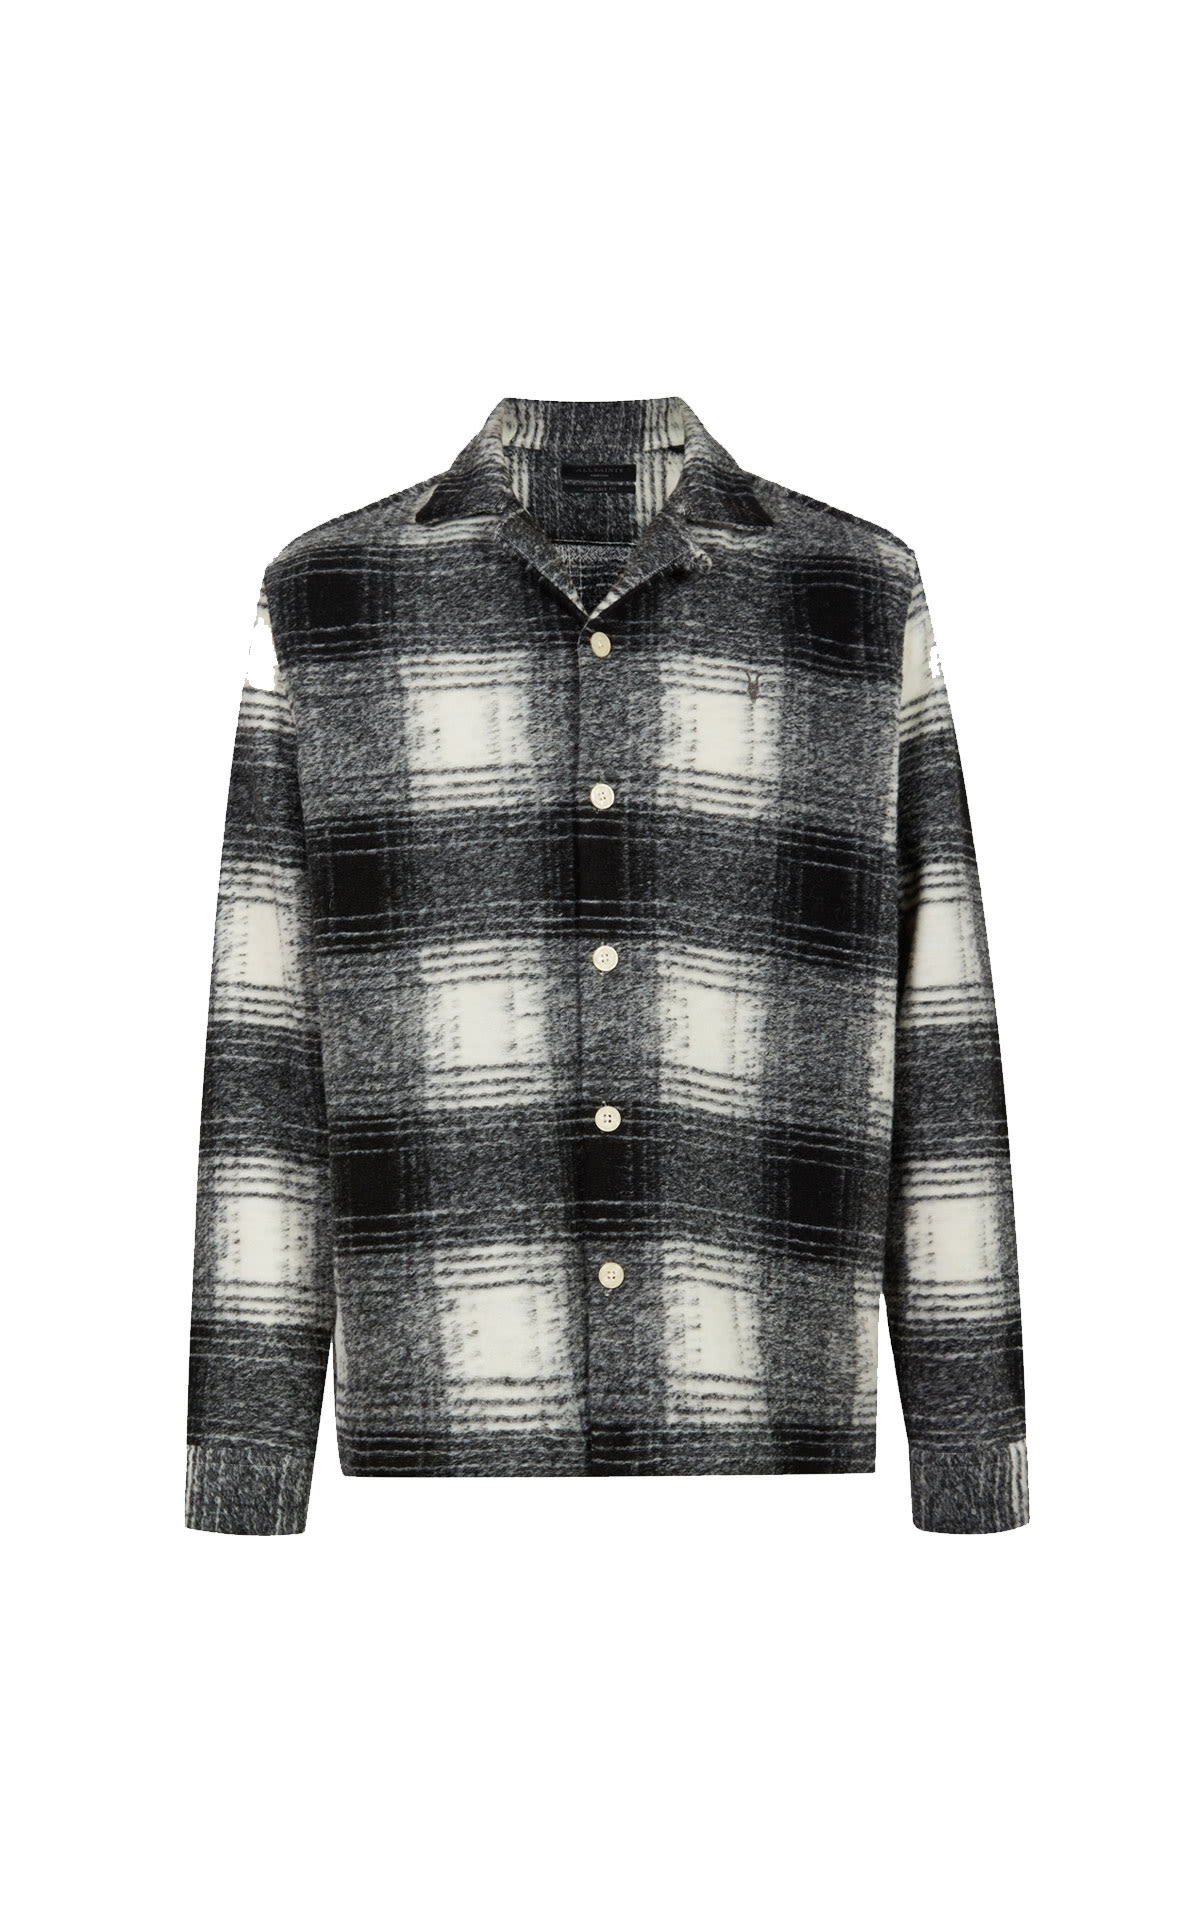 AllSaints Tremont long sleeve shirt from Bicester Village